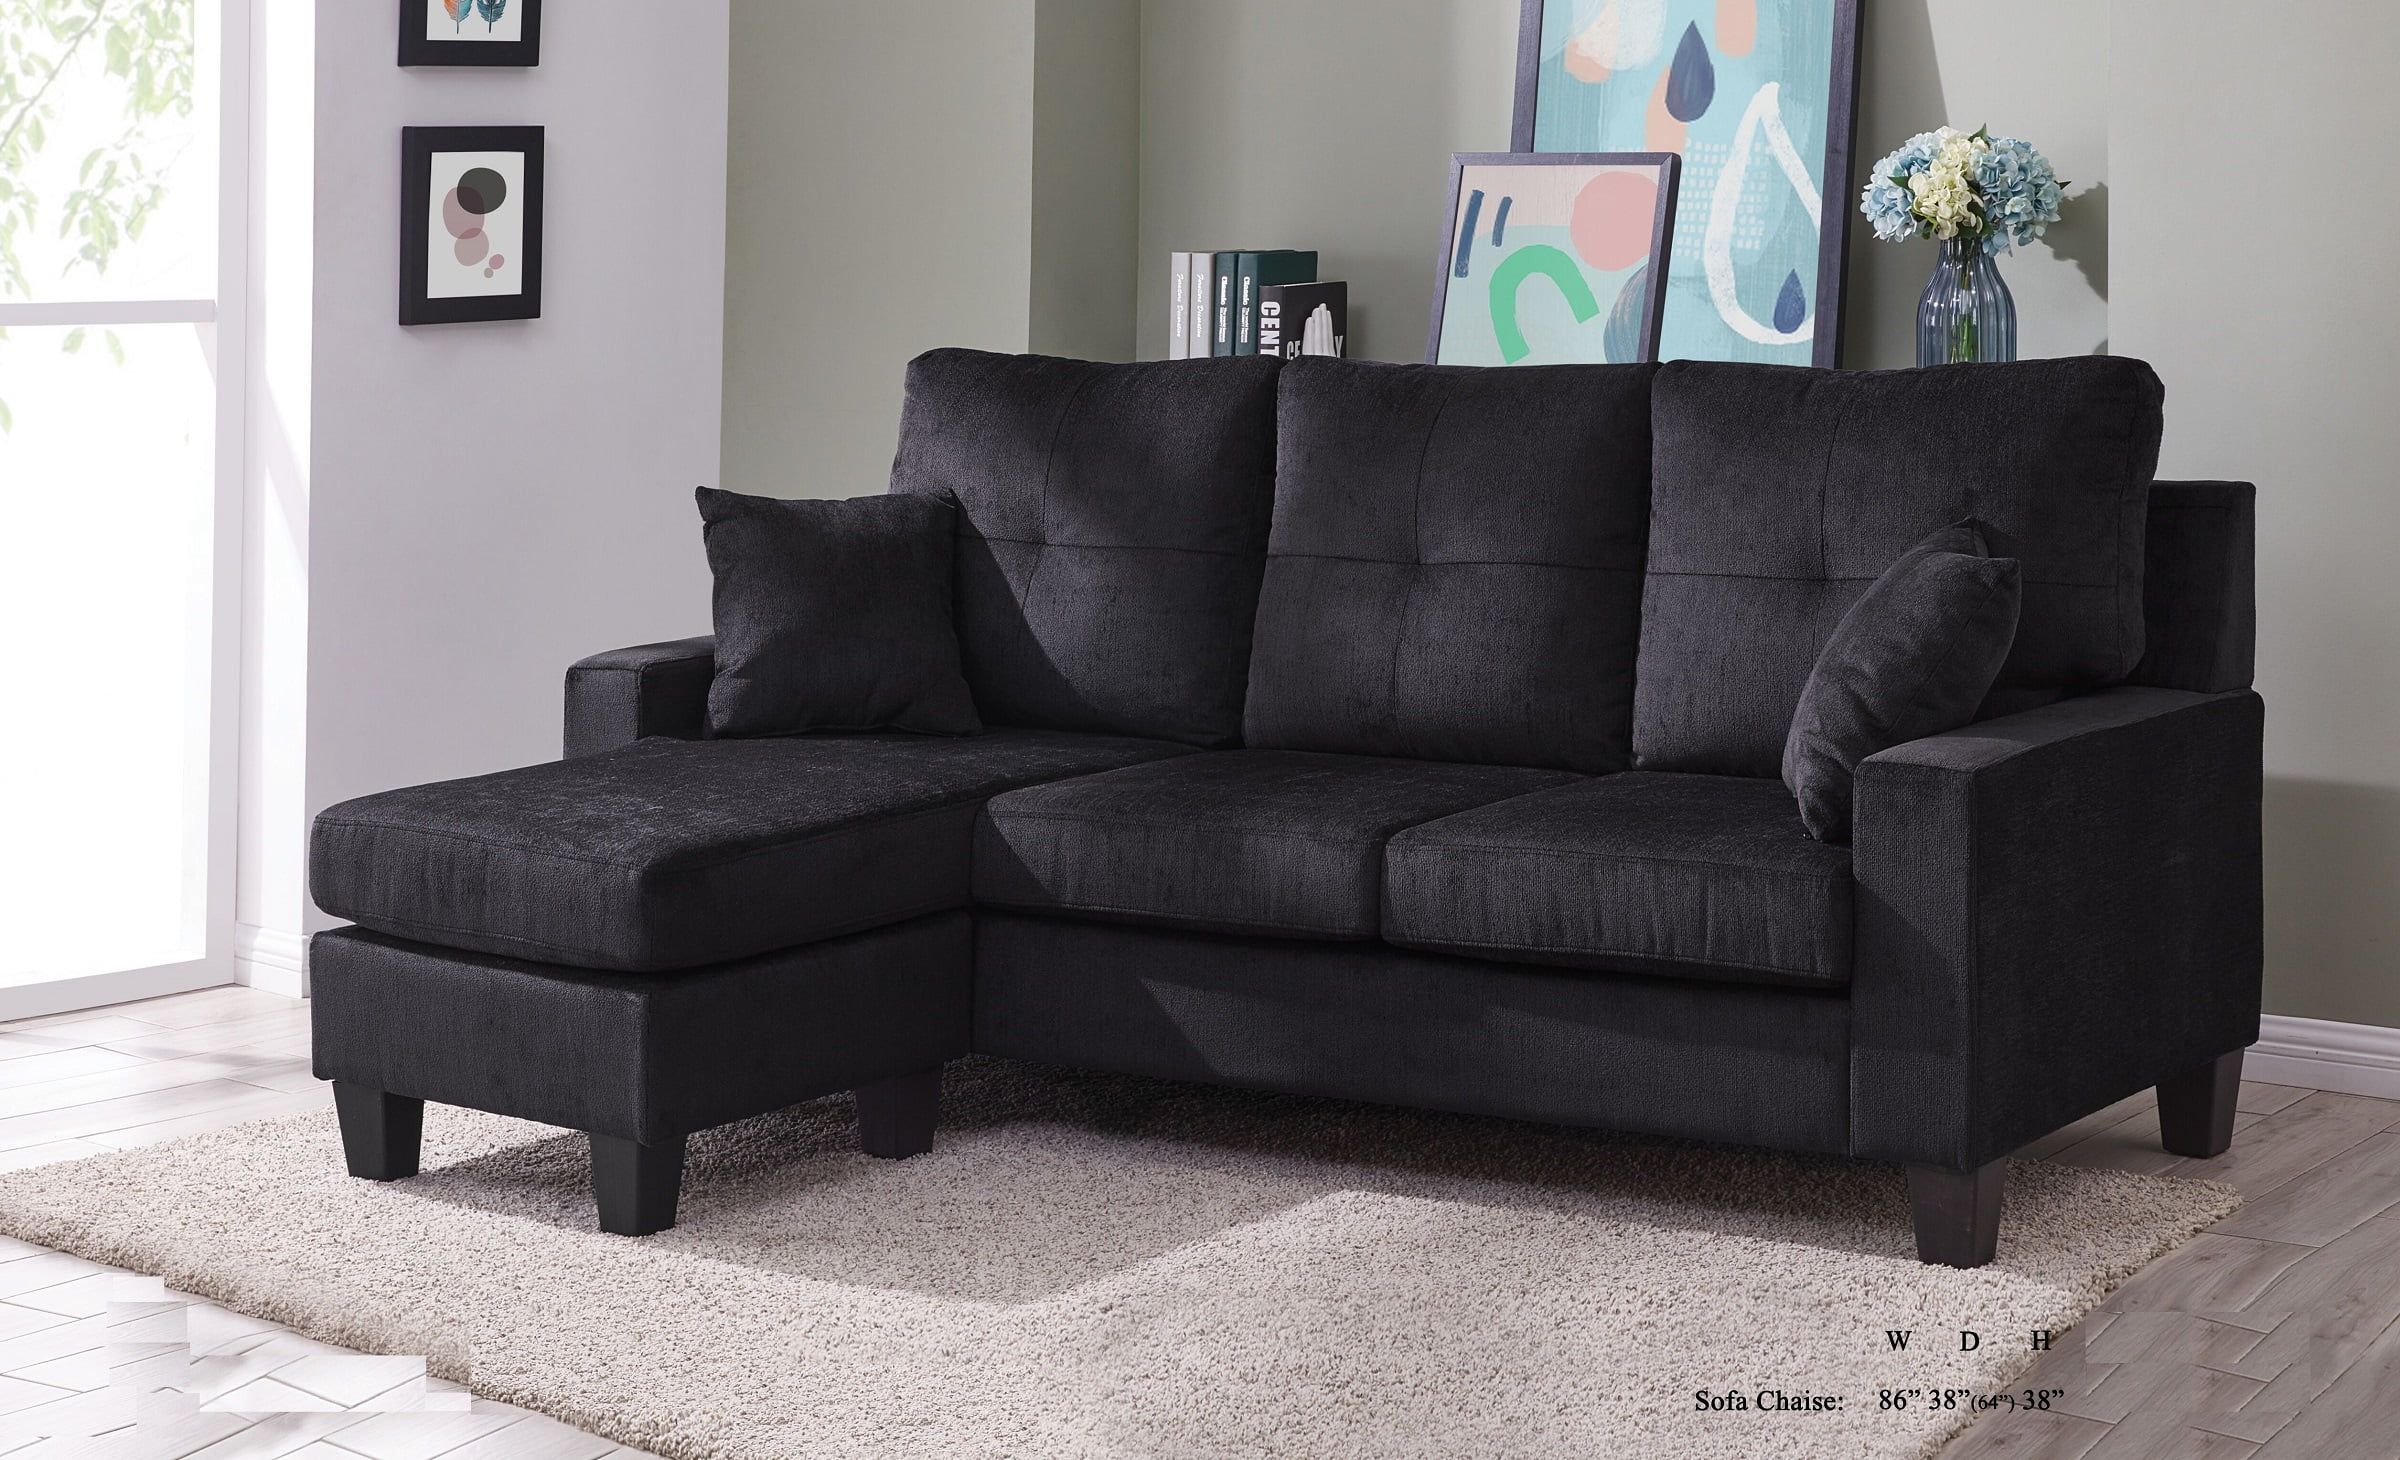 Sectional Sofa Set Black Fabric Tufted Cushion Sofa Chaise Small Space Pertaining To Sofas For Compact Living (Gallery 13 of 20)